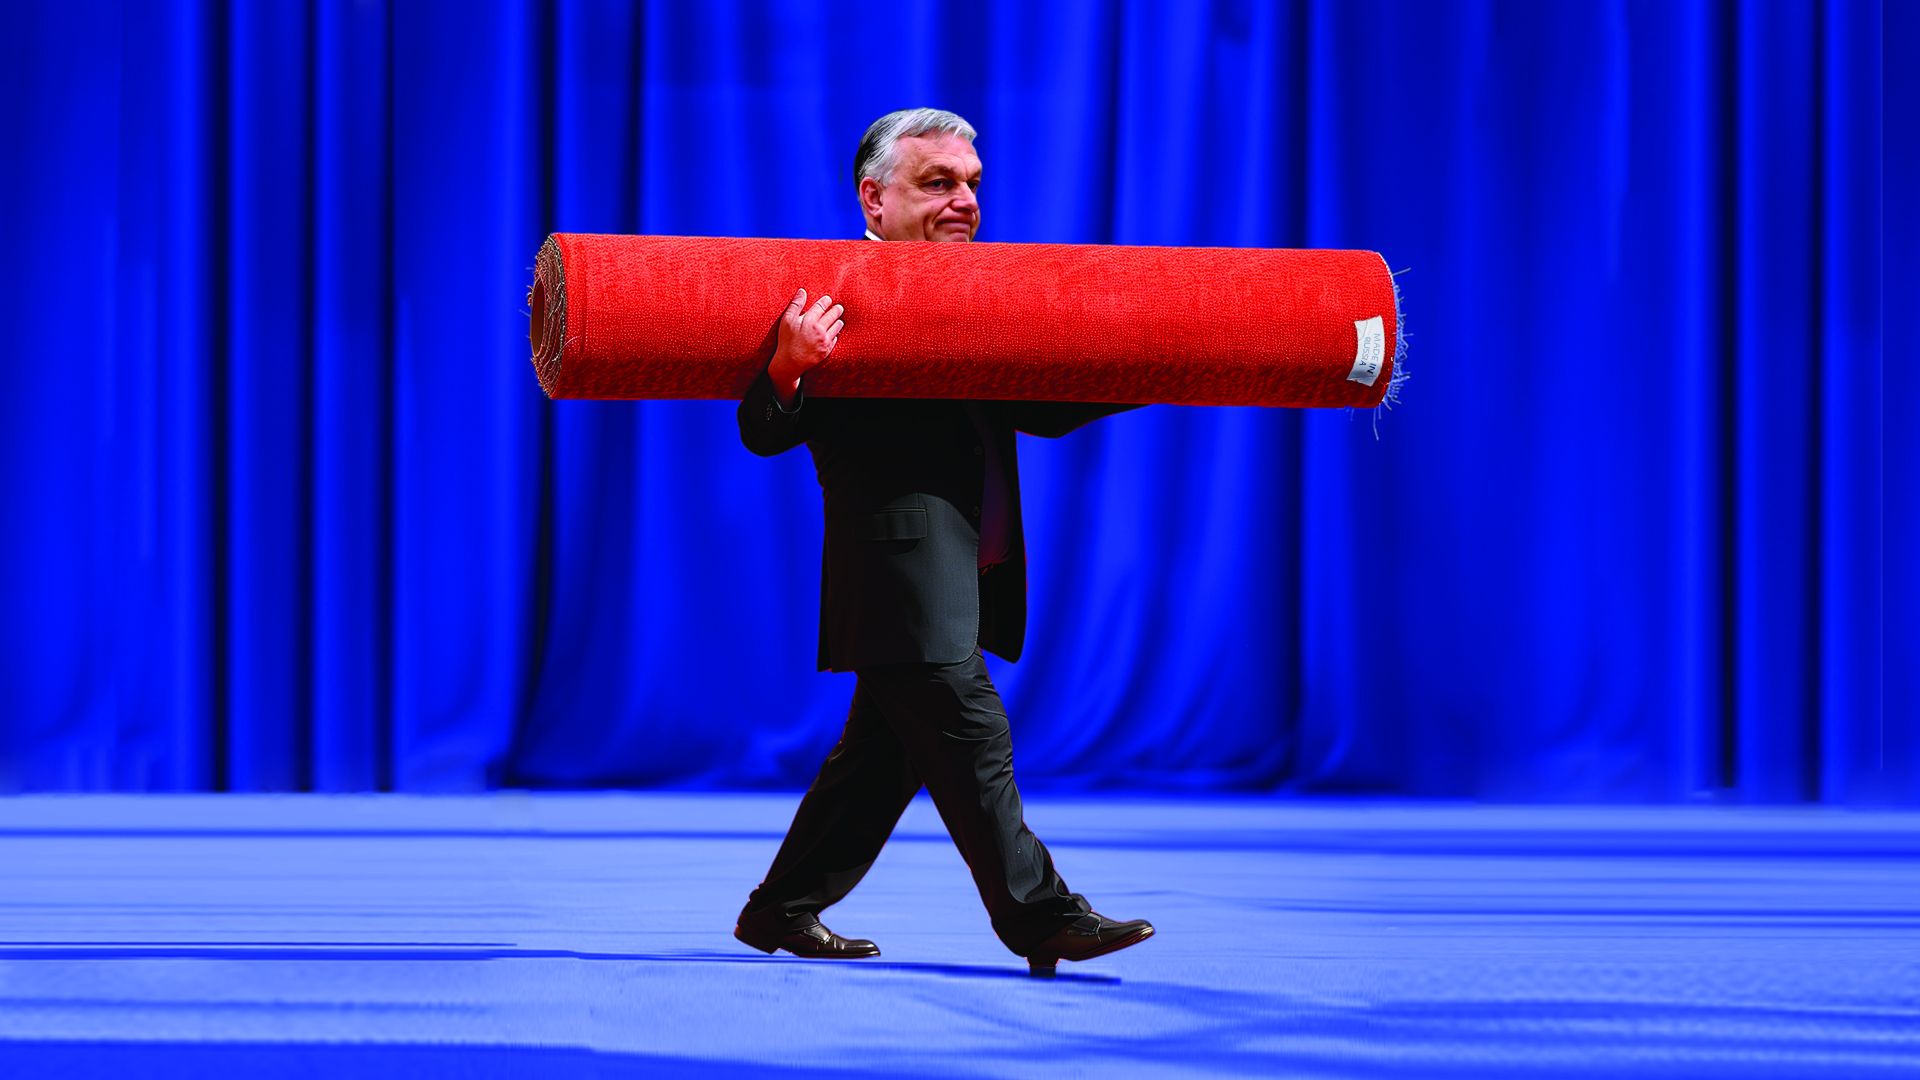 Image of Orban holding a rolled up red carpet